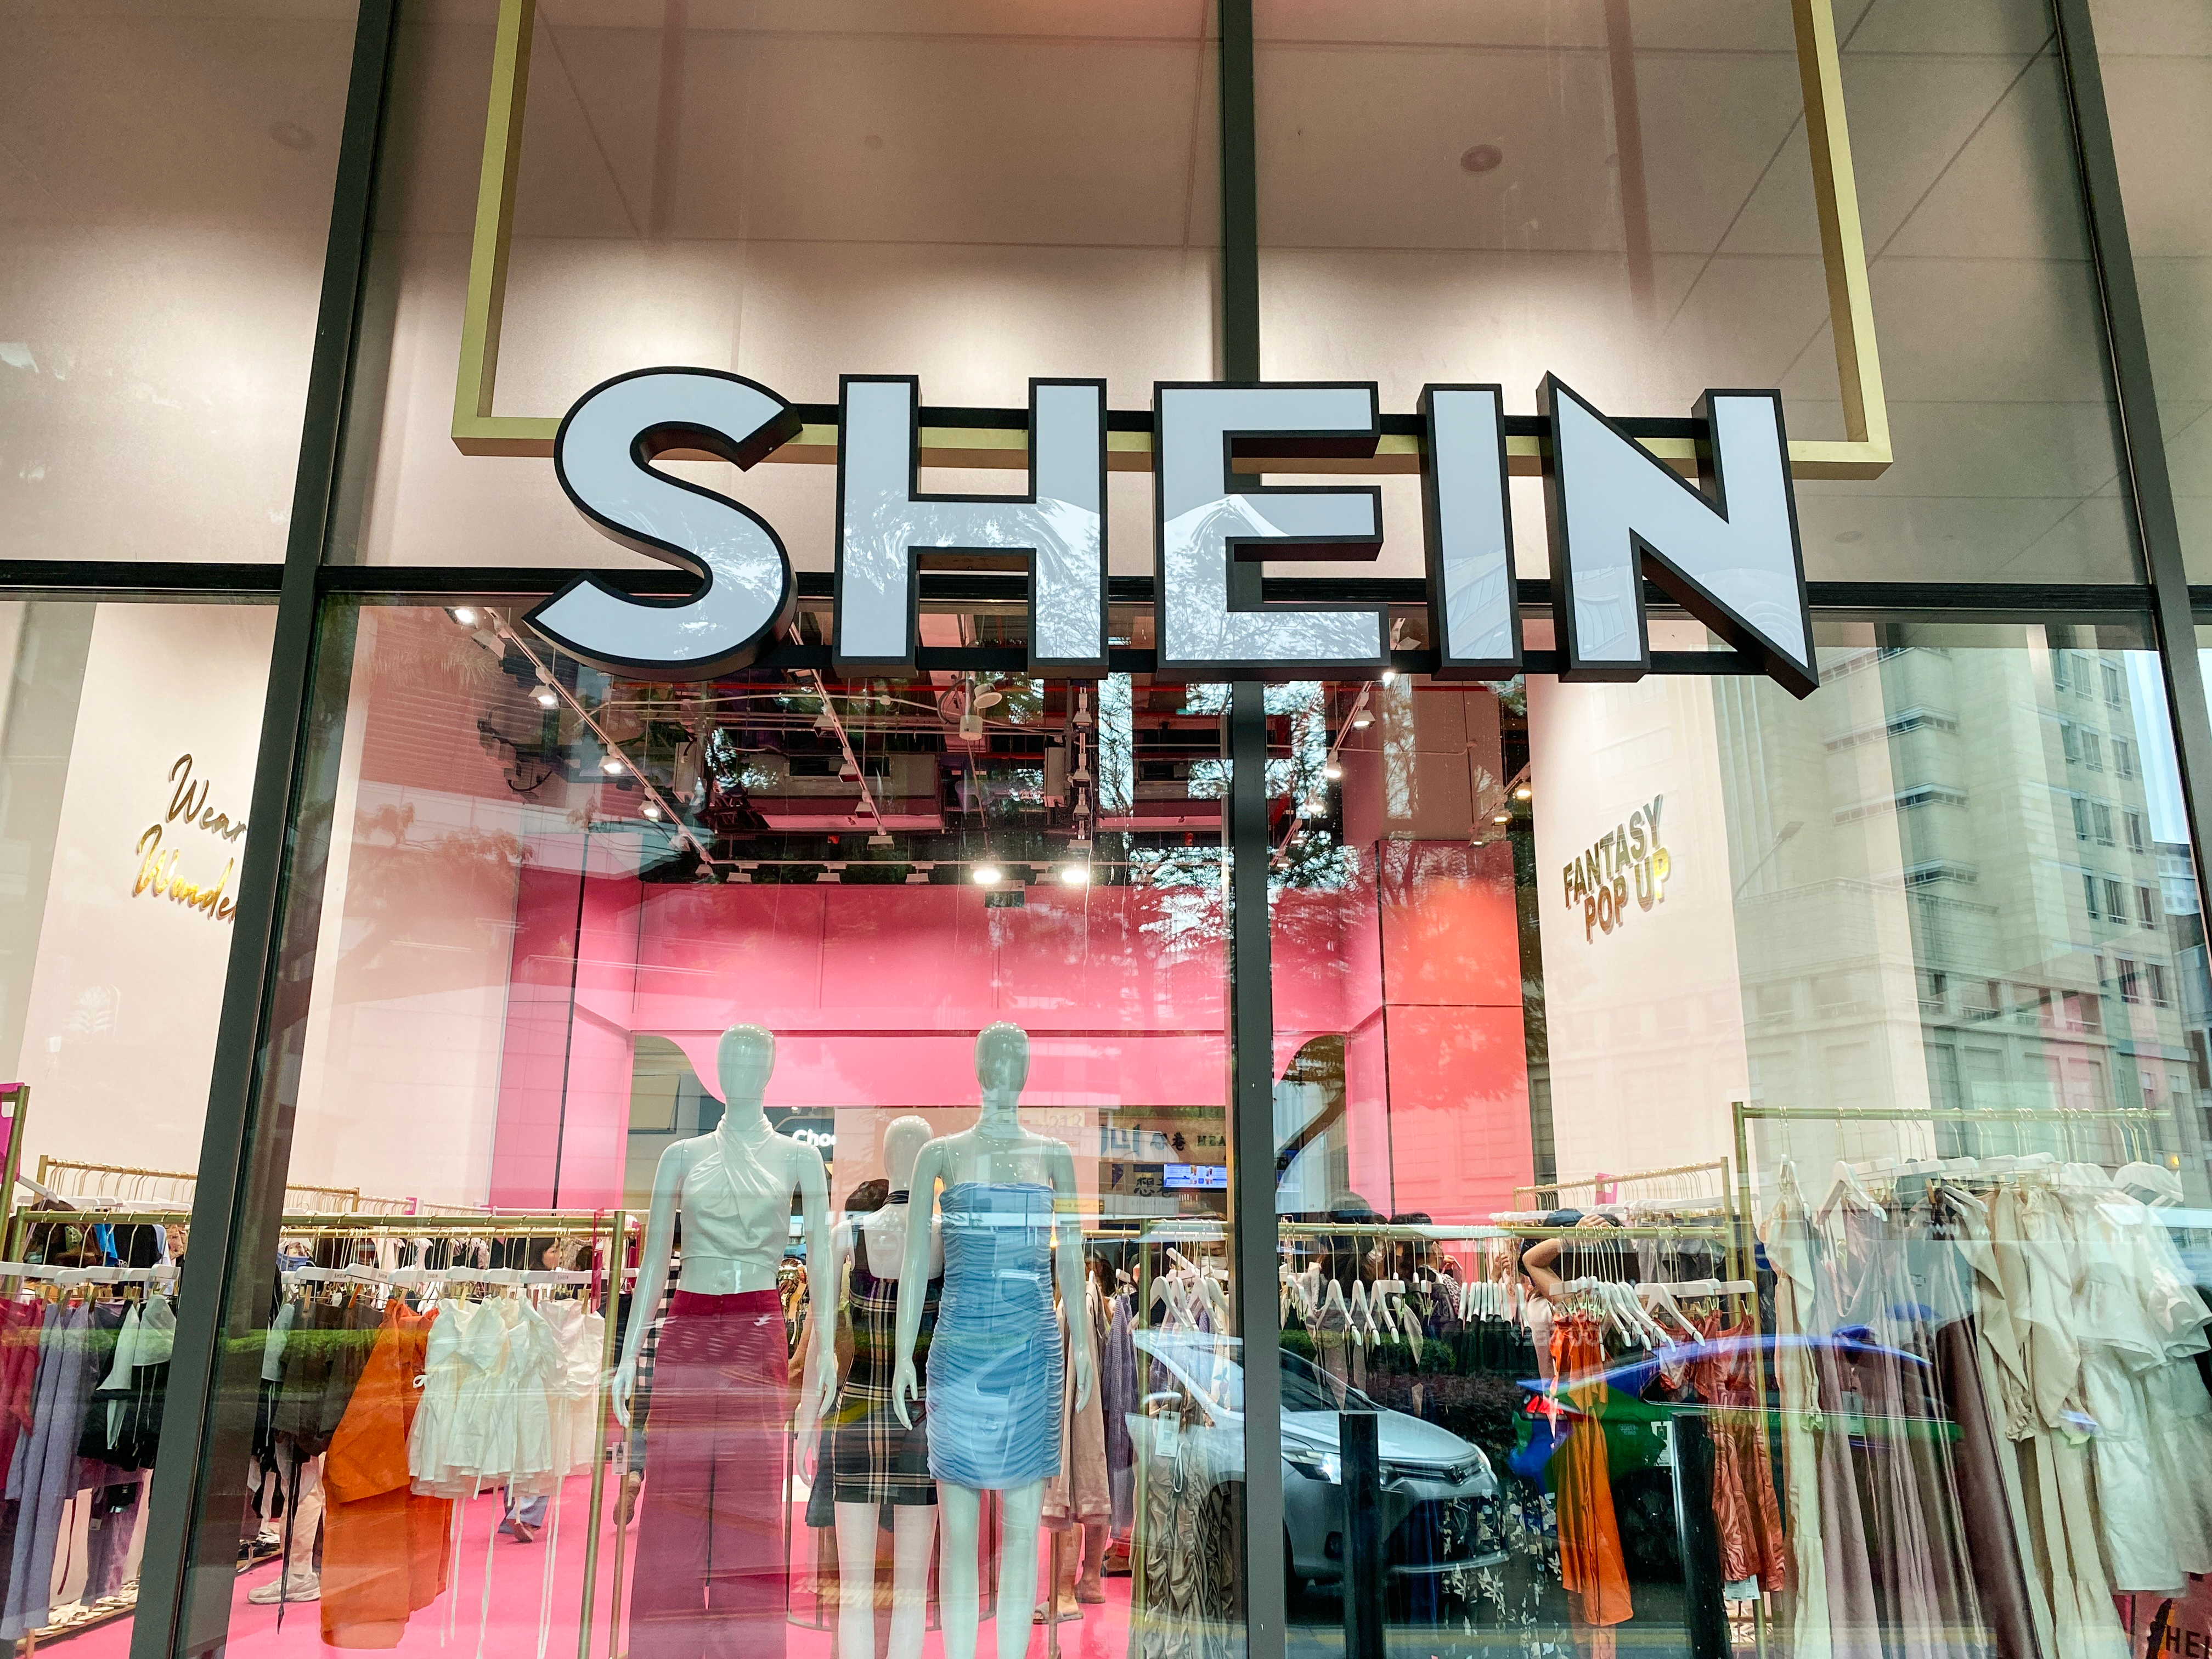 With A Revenue Target Of $58.5 Billion In 2025, Luxury Can't Ignore Shein's  Skyrocketing Success